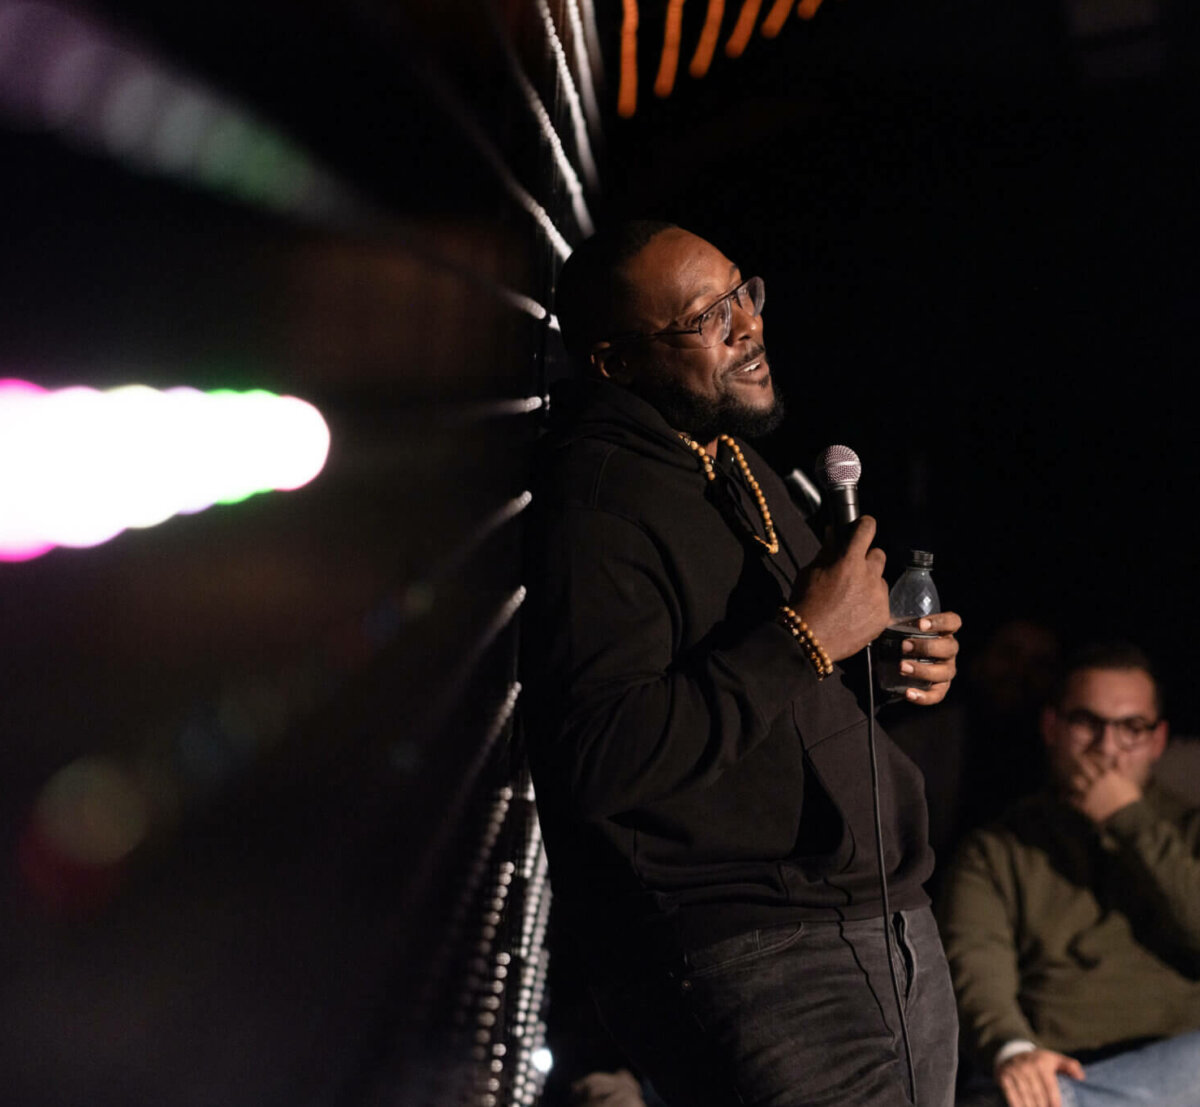 Comedian Aurie Styla leans on the LED wall at Big Belly Comedy Club London